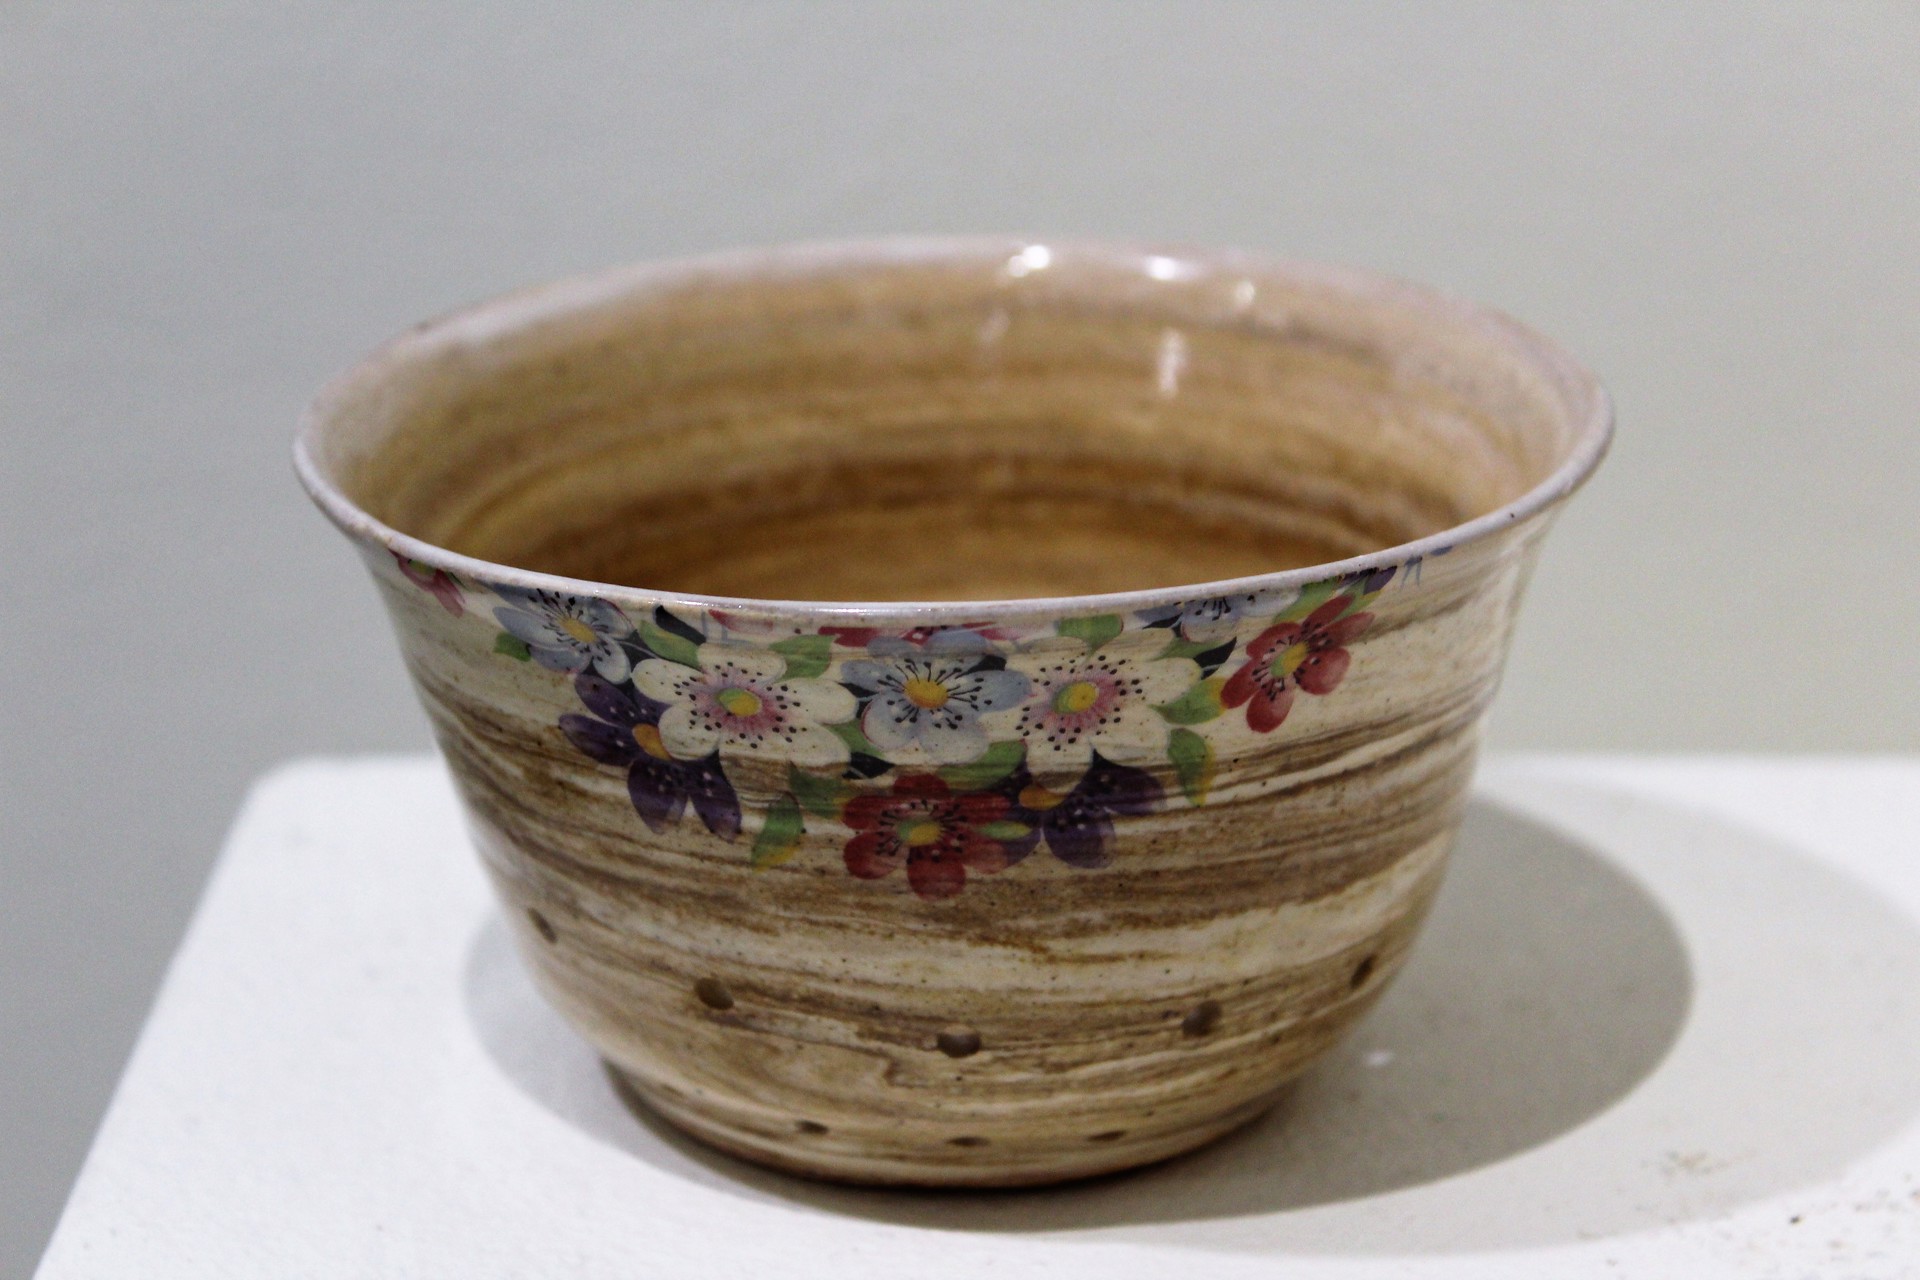 Berry Bowl with Flowers by Kristen Kinnaley